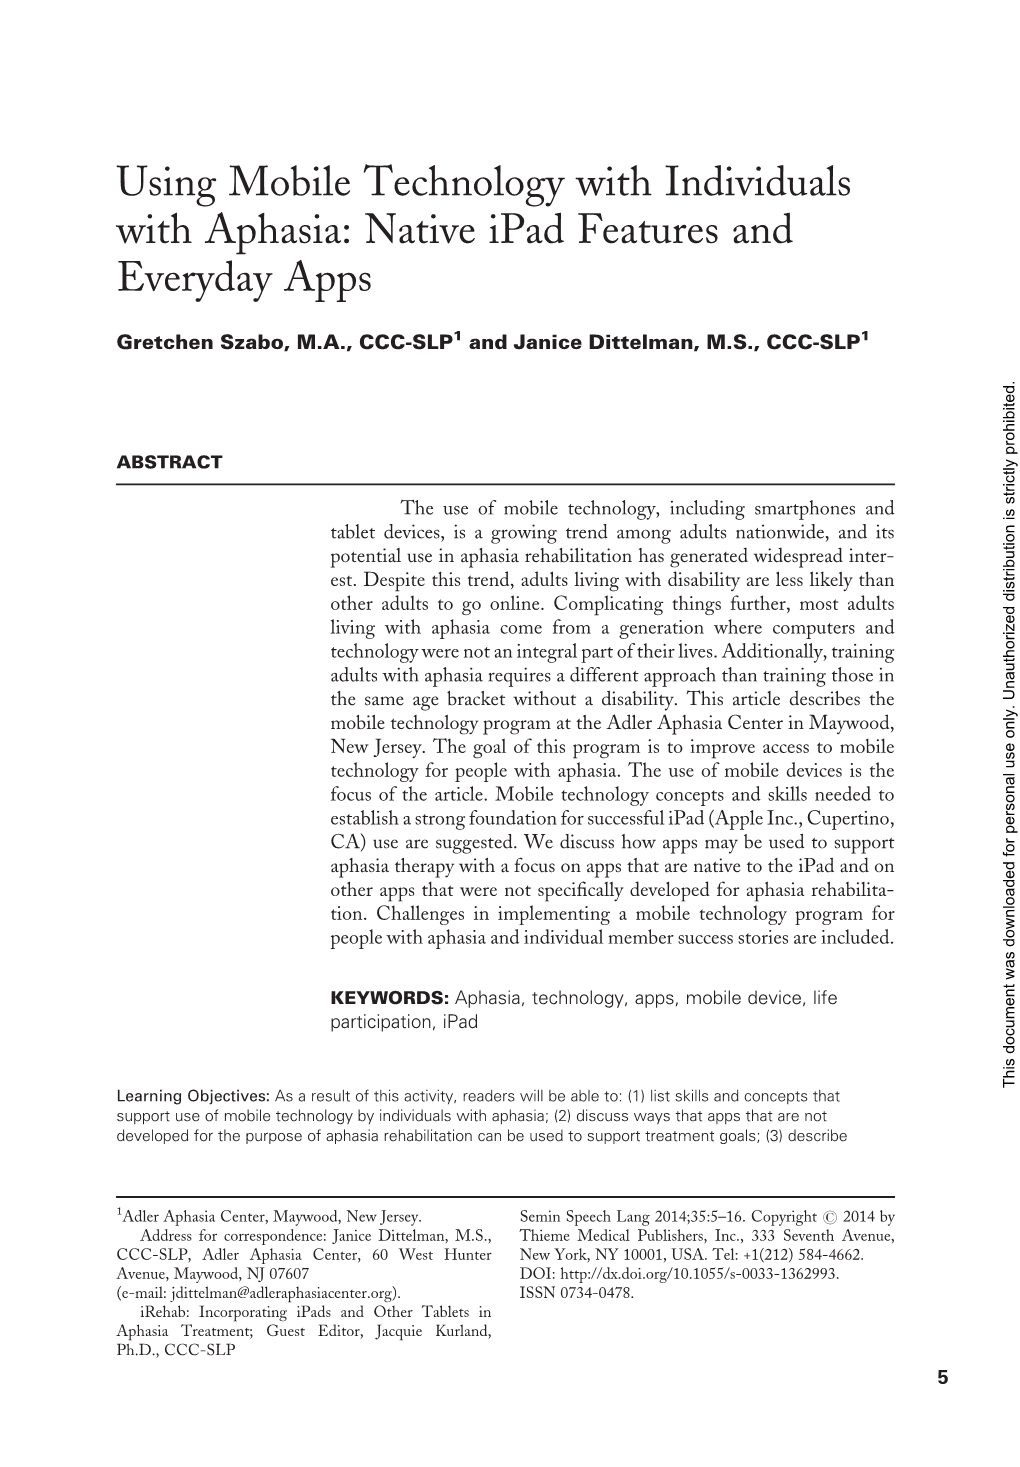 Using Mobile Technology with Individuals with Aphasia: Native Ipad Features and Everyday Apps